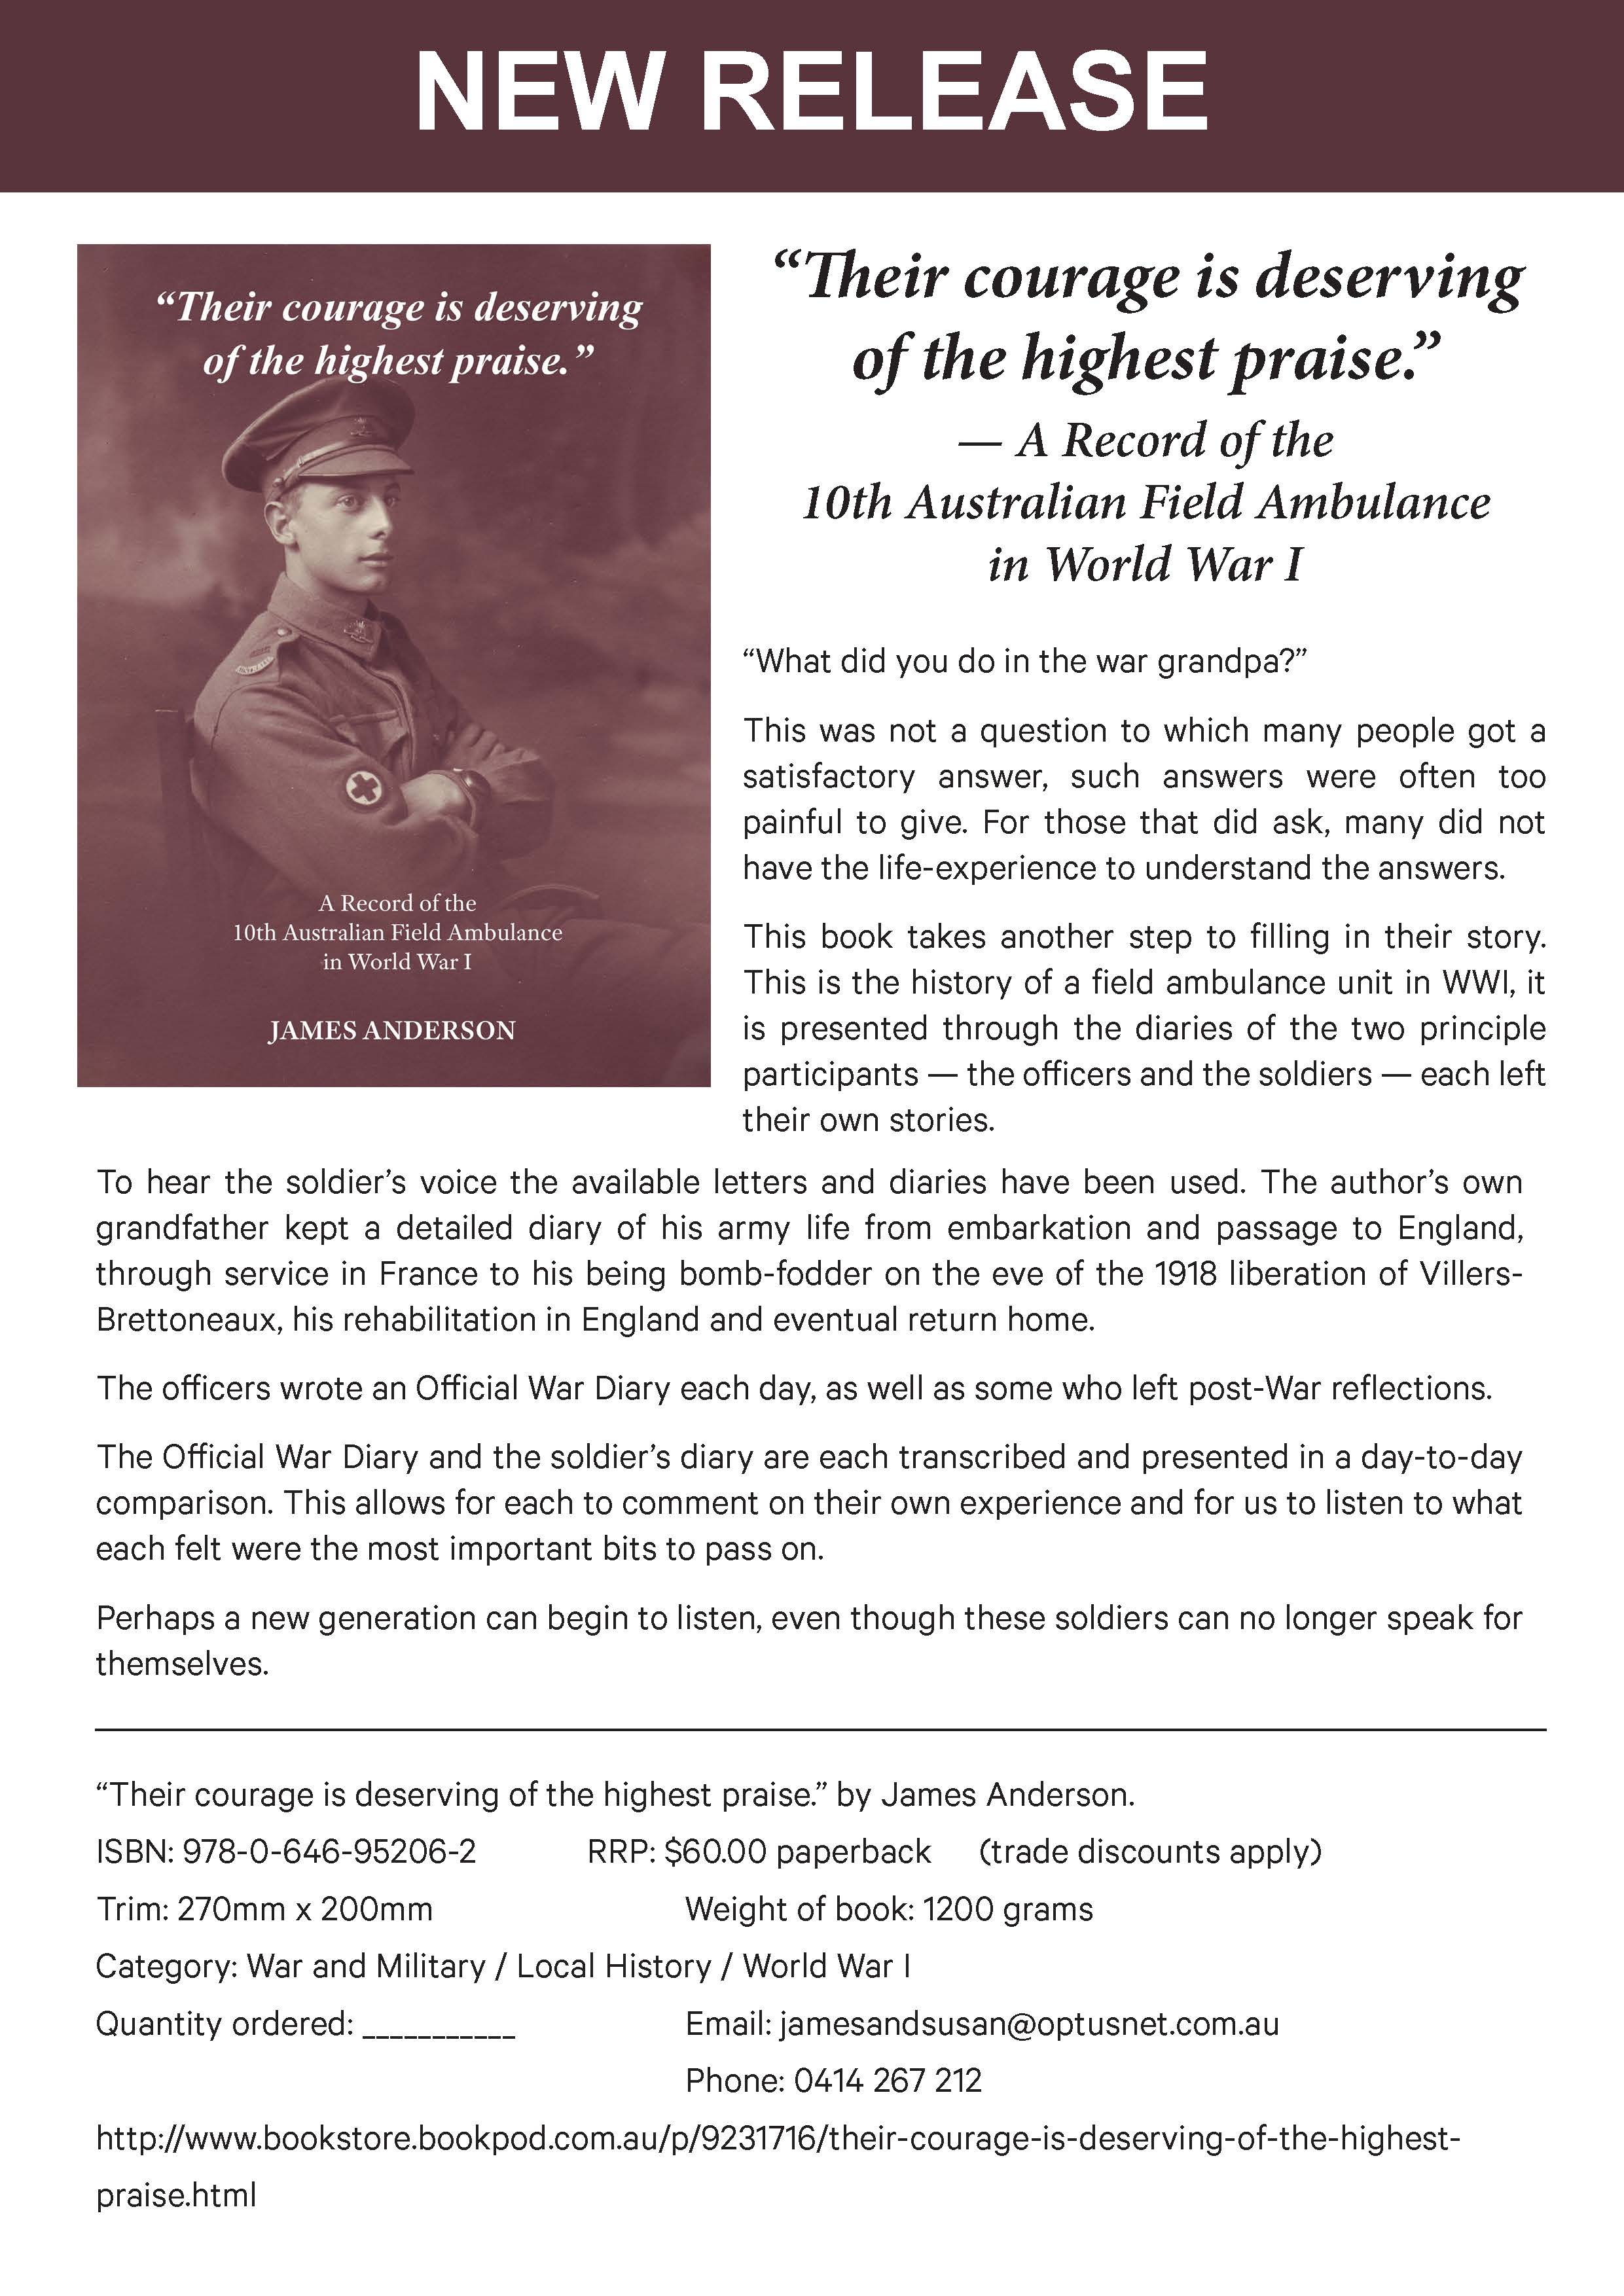 “Their courage is deserving of the highest praise.” — A Record of the 10th Australian Field Ambulance in World War I by James Anderson